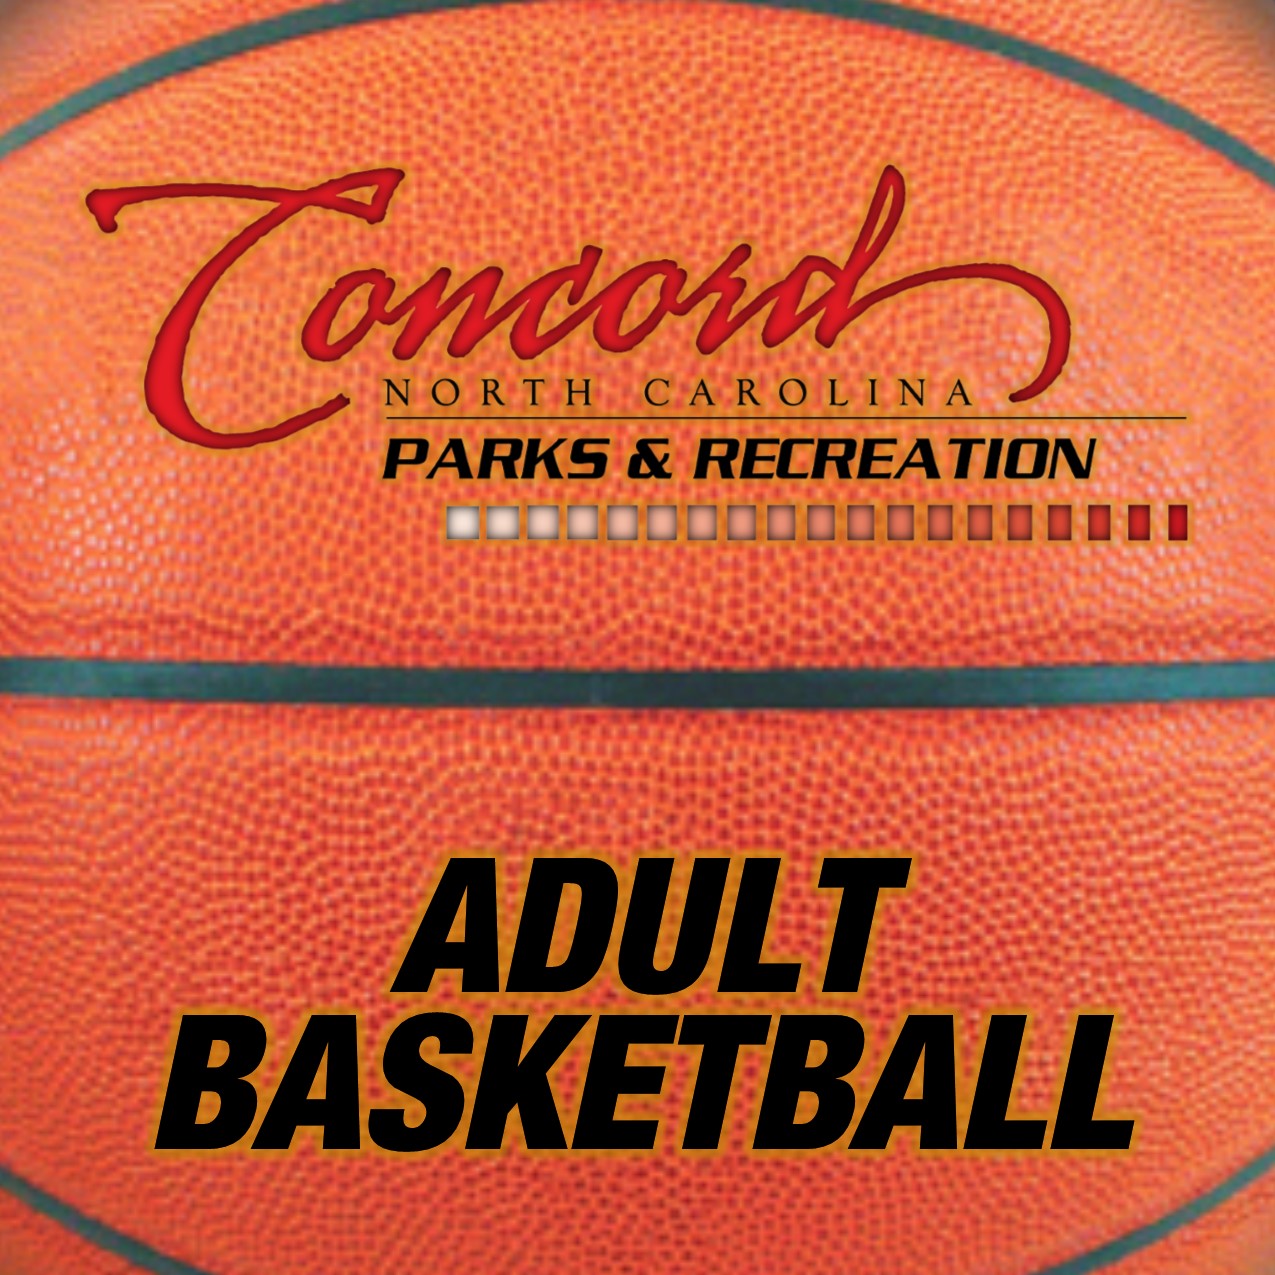 Adult Basketball with Concord Parks and Recreation Logo